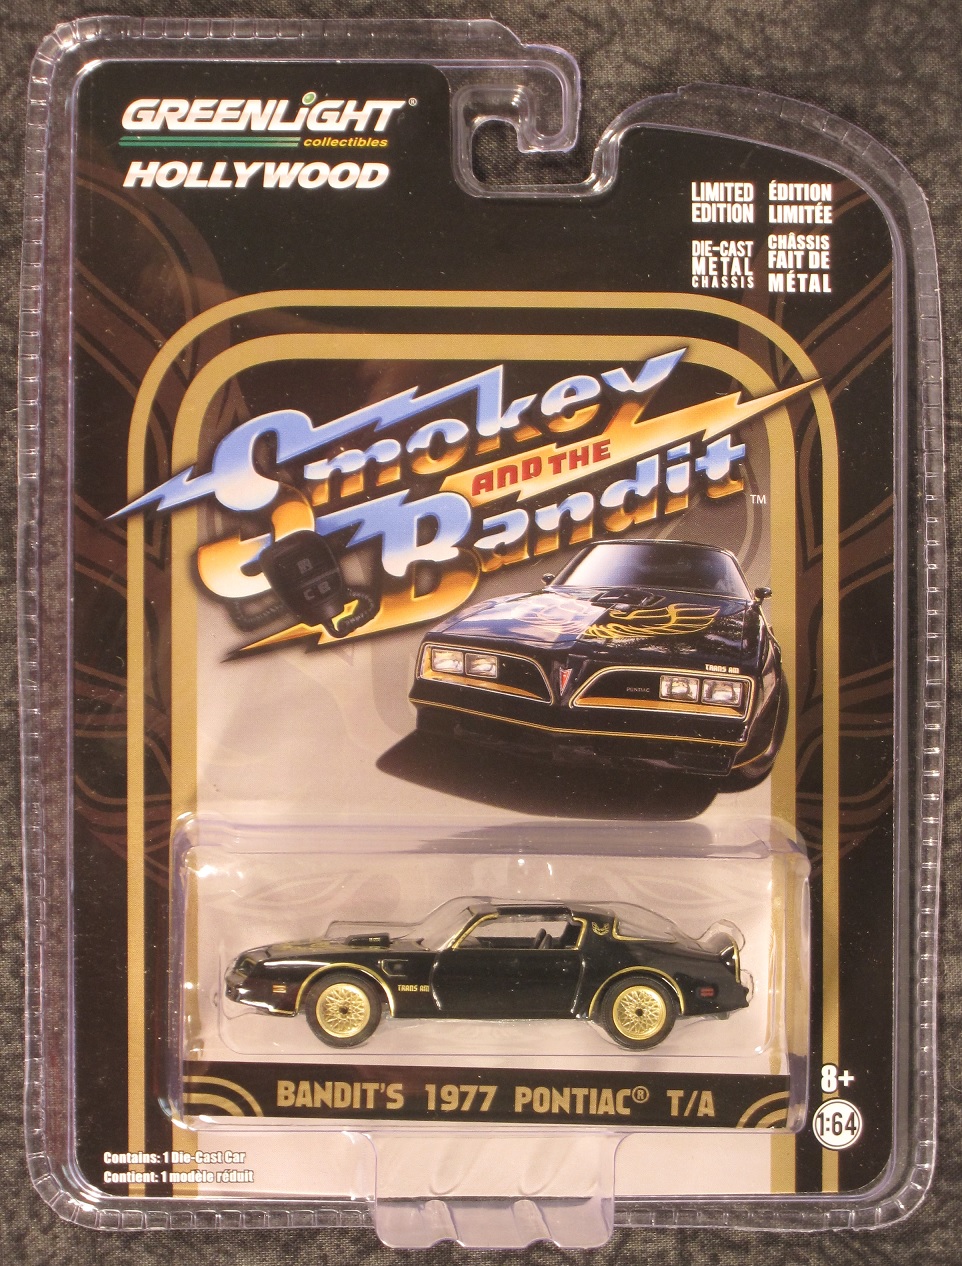 Smokey and the Bandit #1 Limited edition die-cast bandit's 1:64 1977 Pontiac TA 